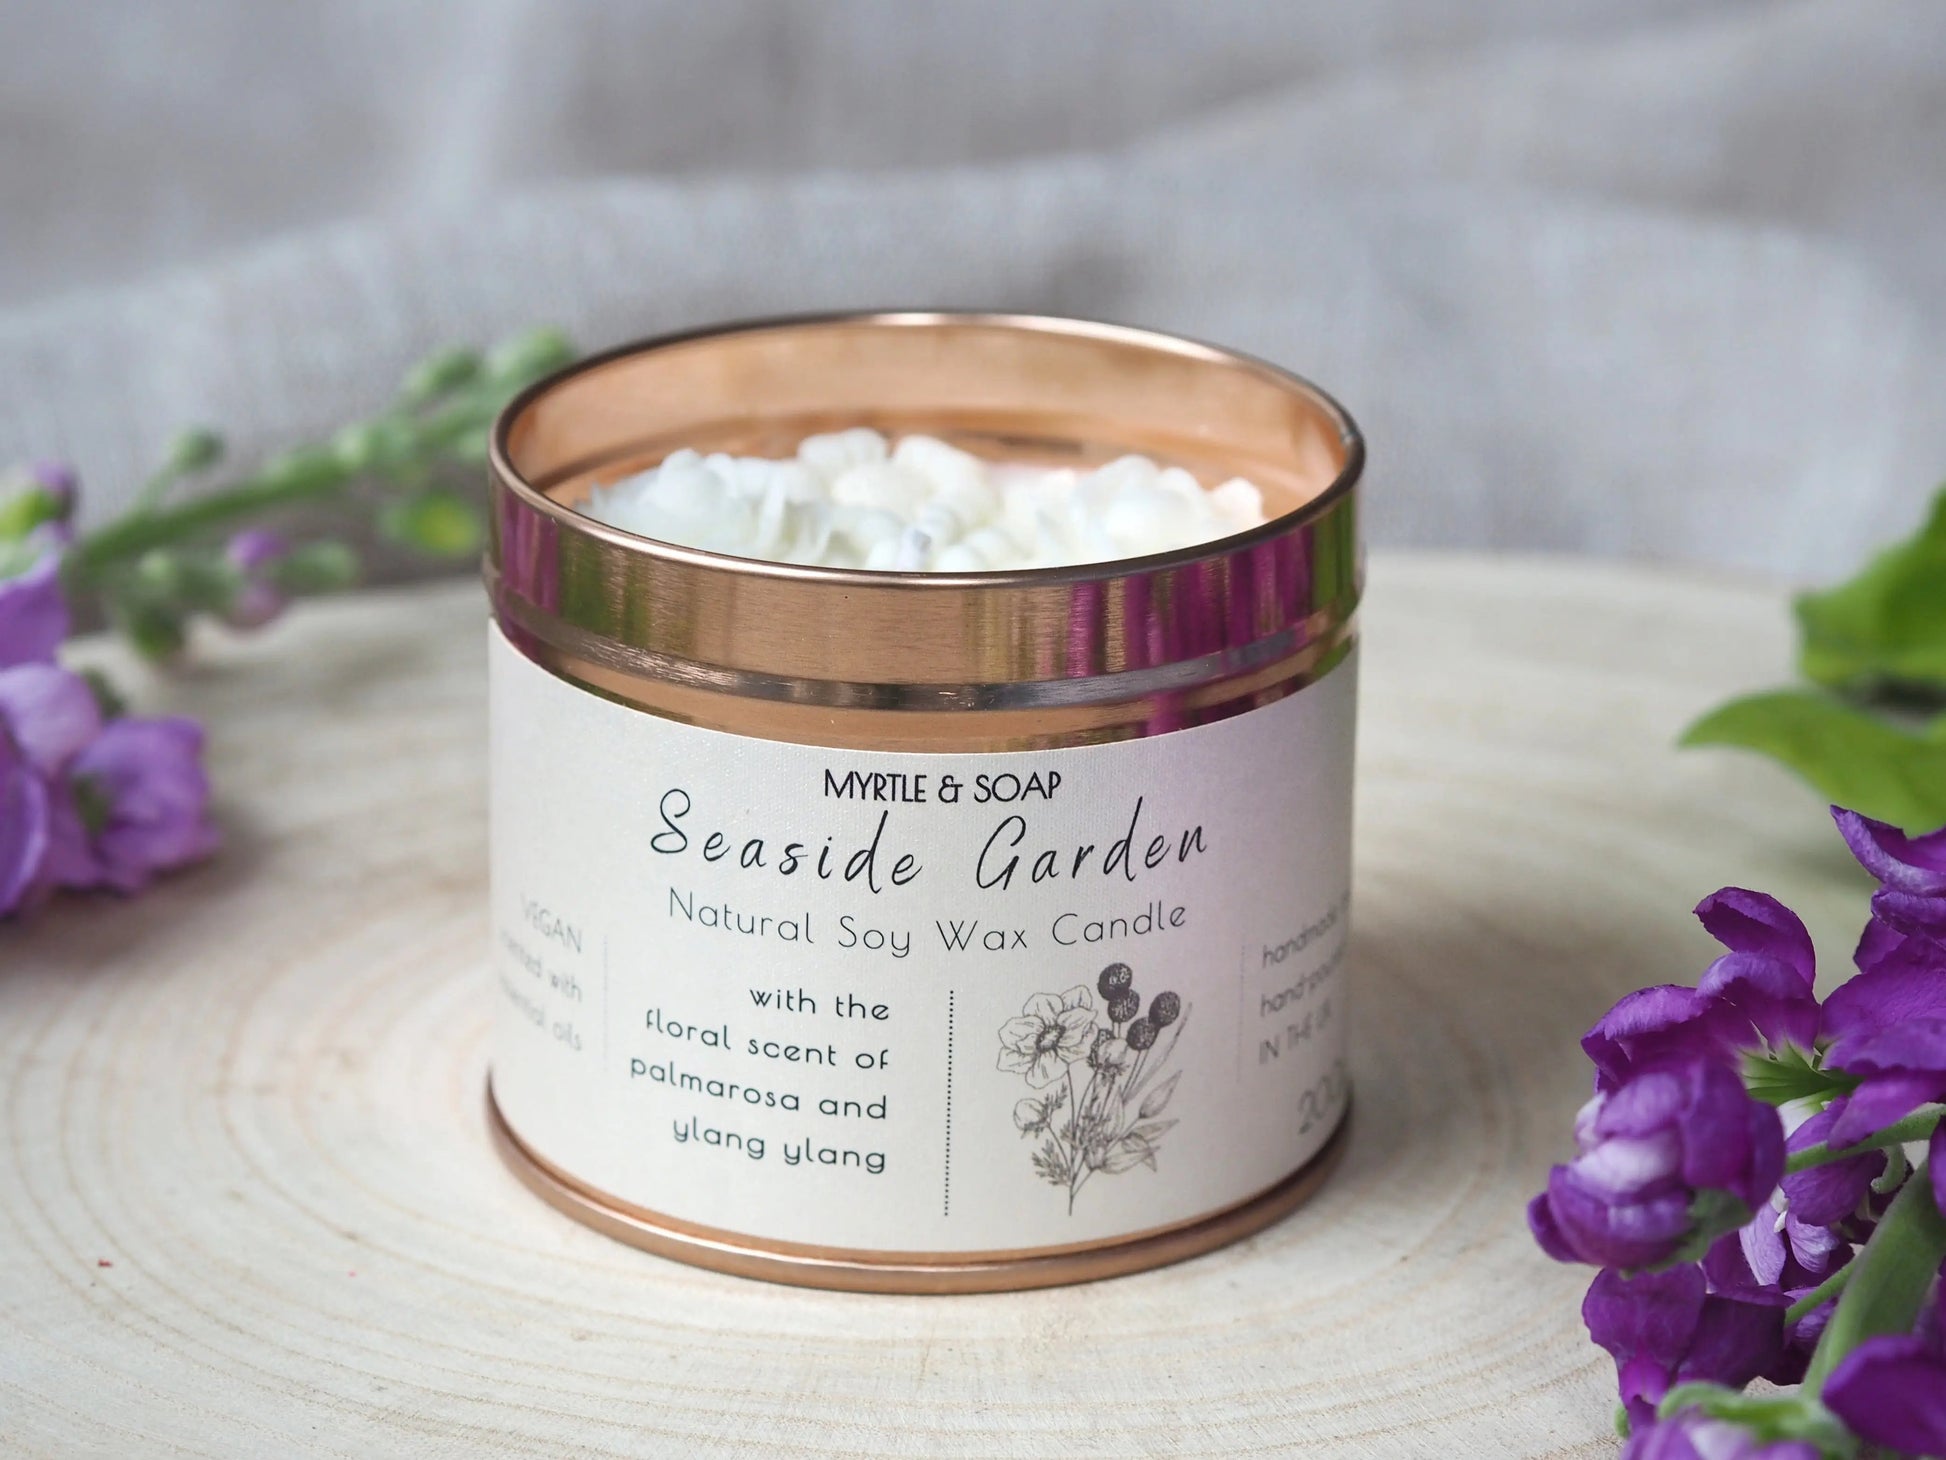  SEASIDE GARDEN Natural Soy Wax Candle